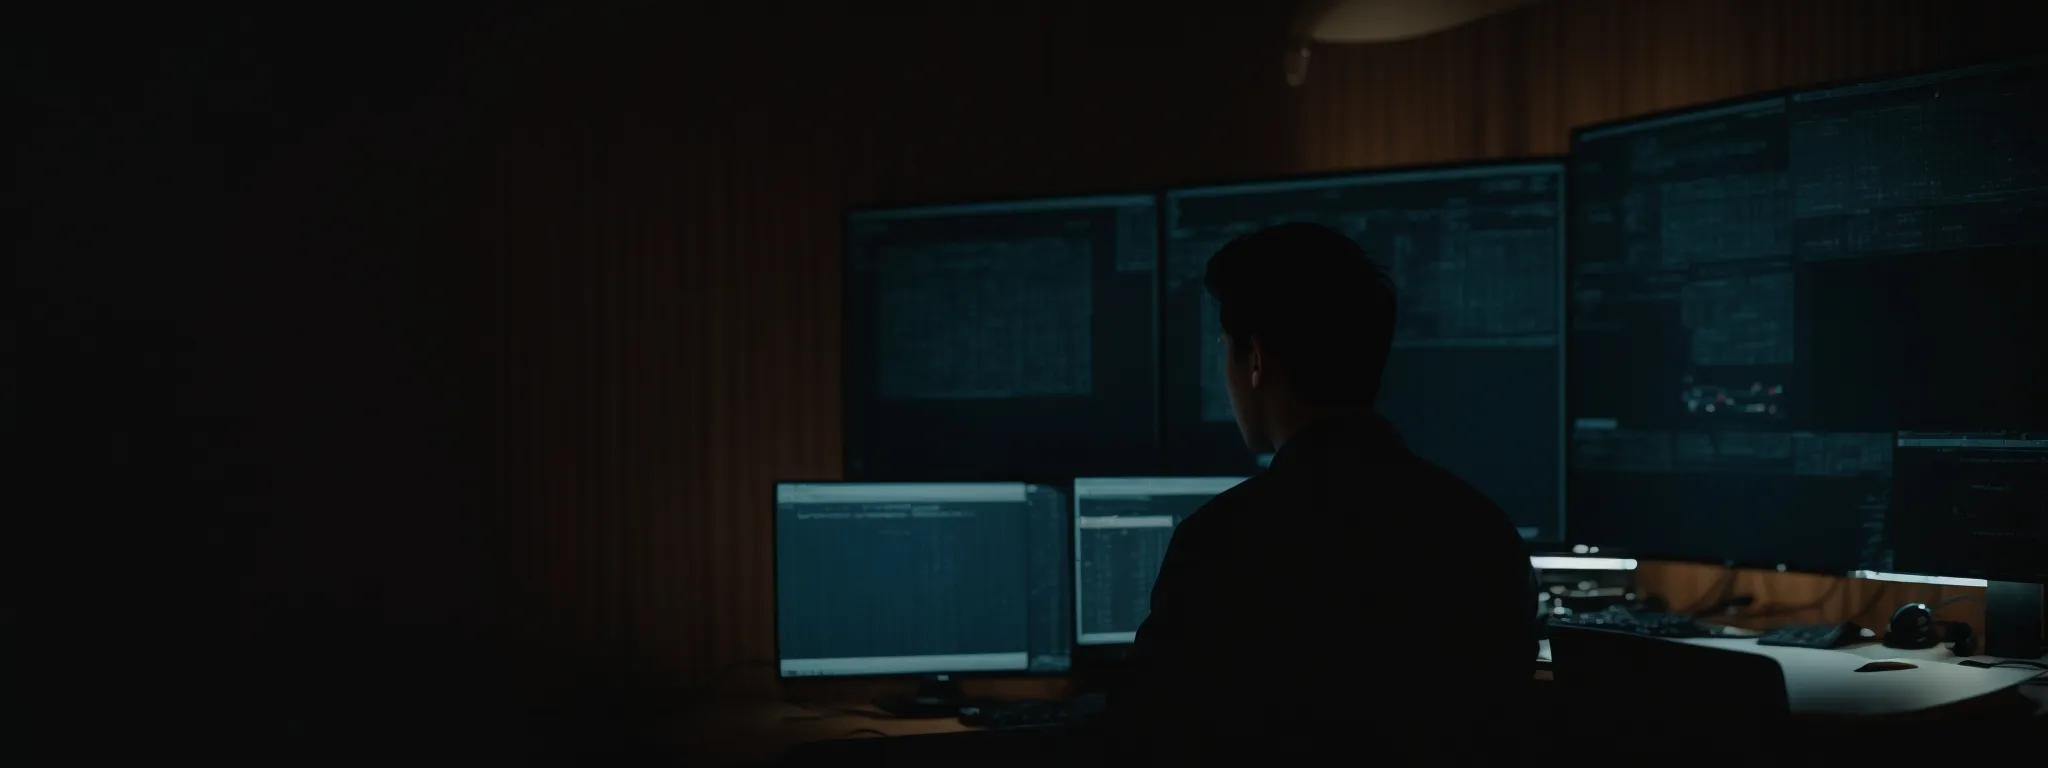 a man at a computer, visibly contemplating the search results on his screen in a dimly lit room.